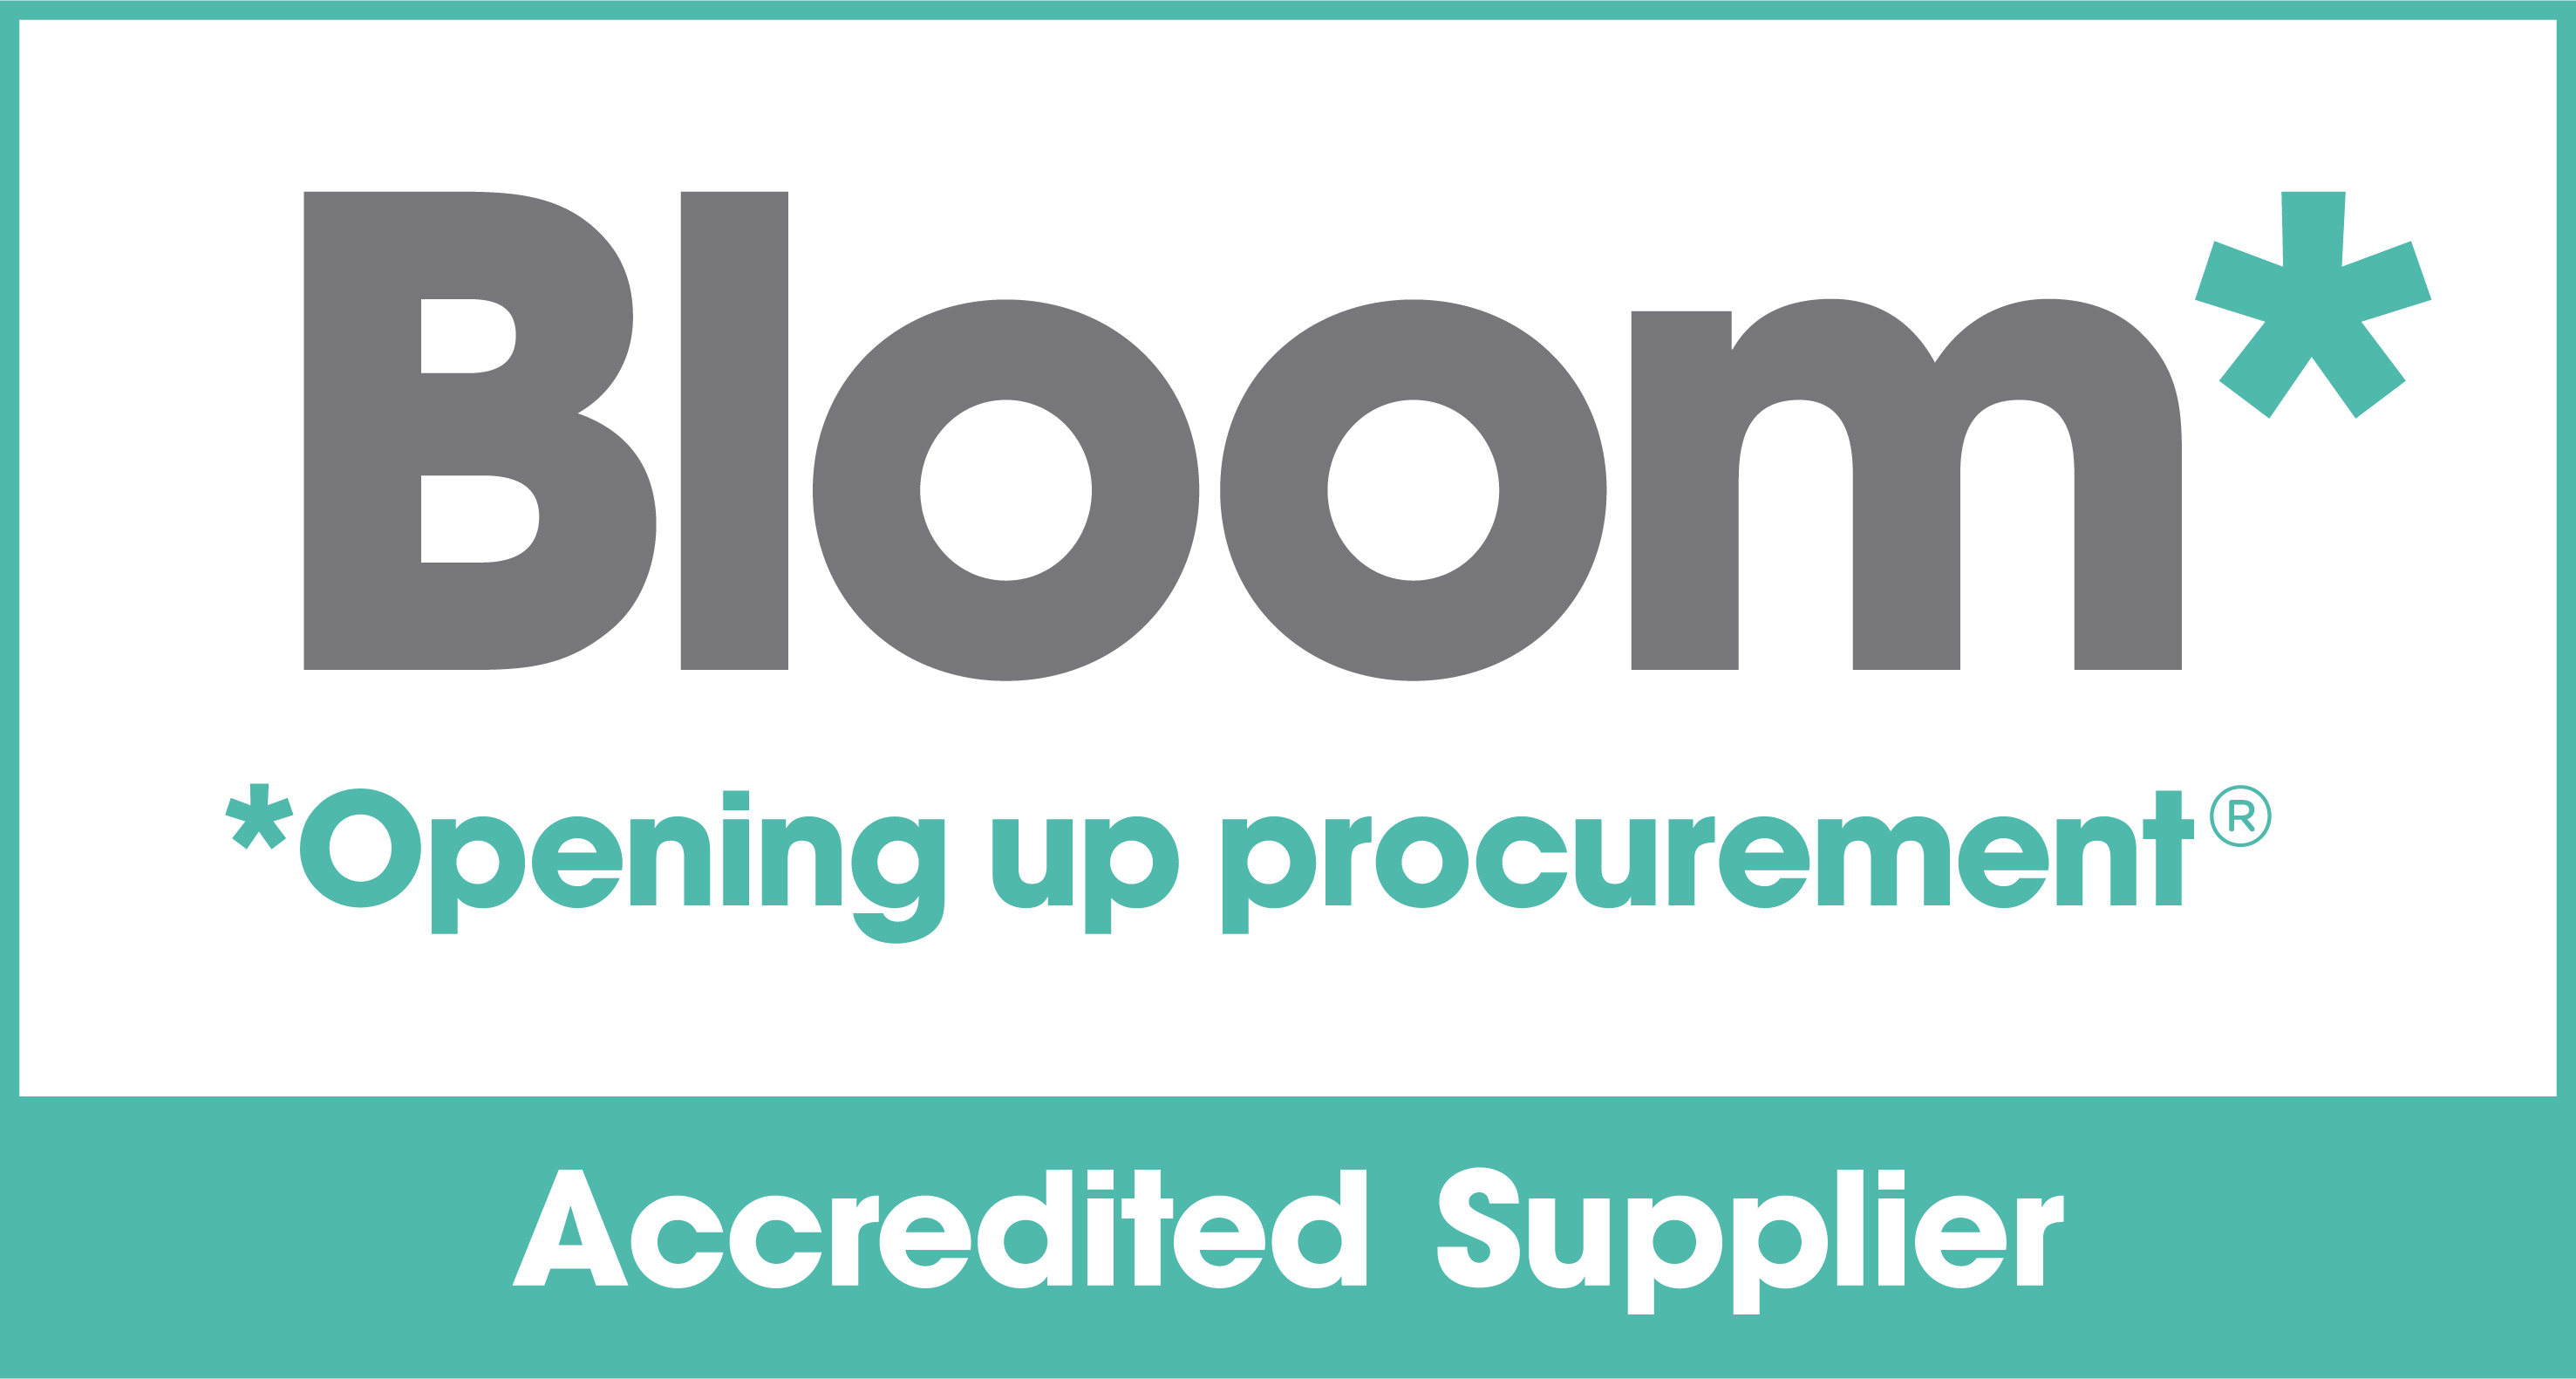 ICAX is accredited to Bloom